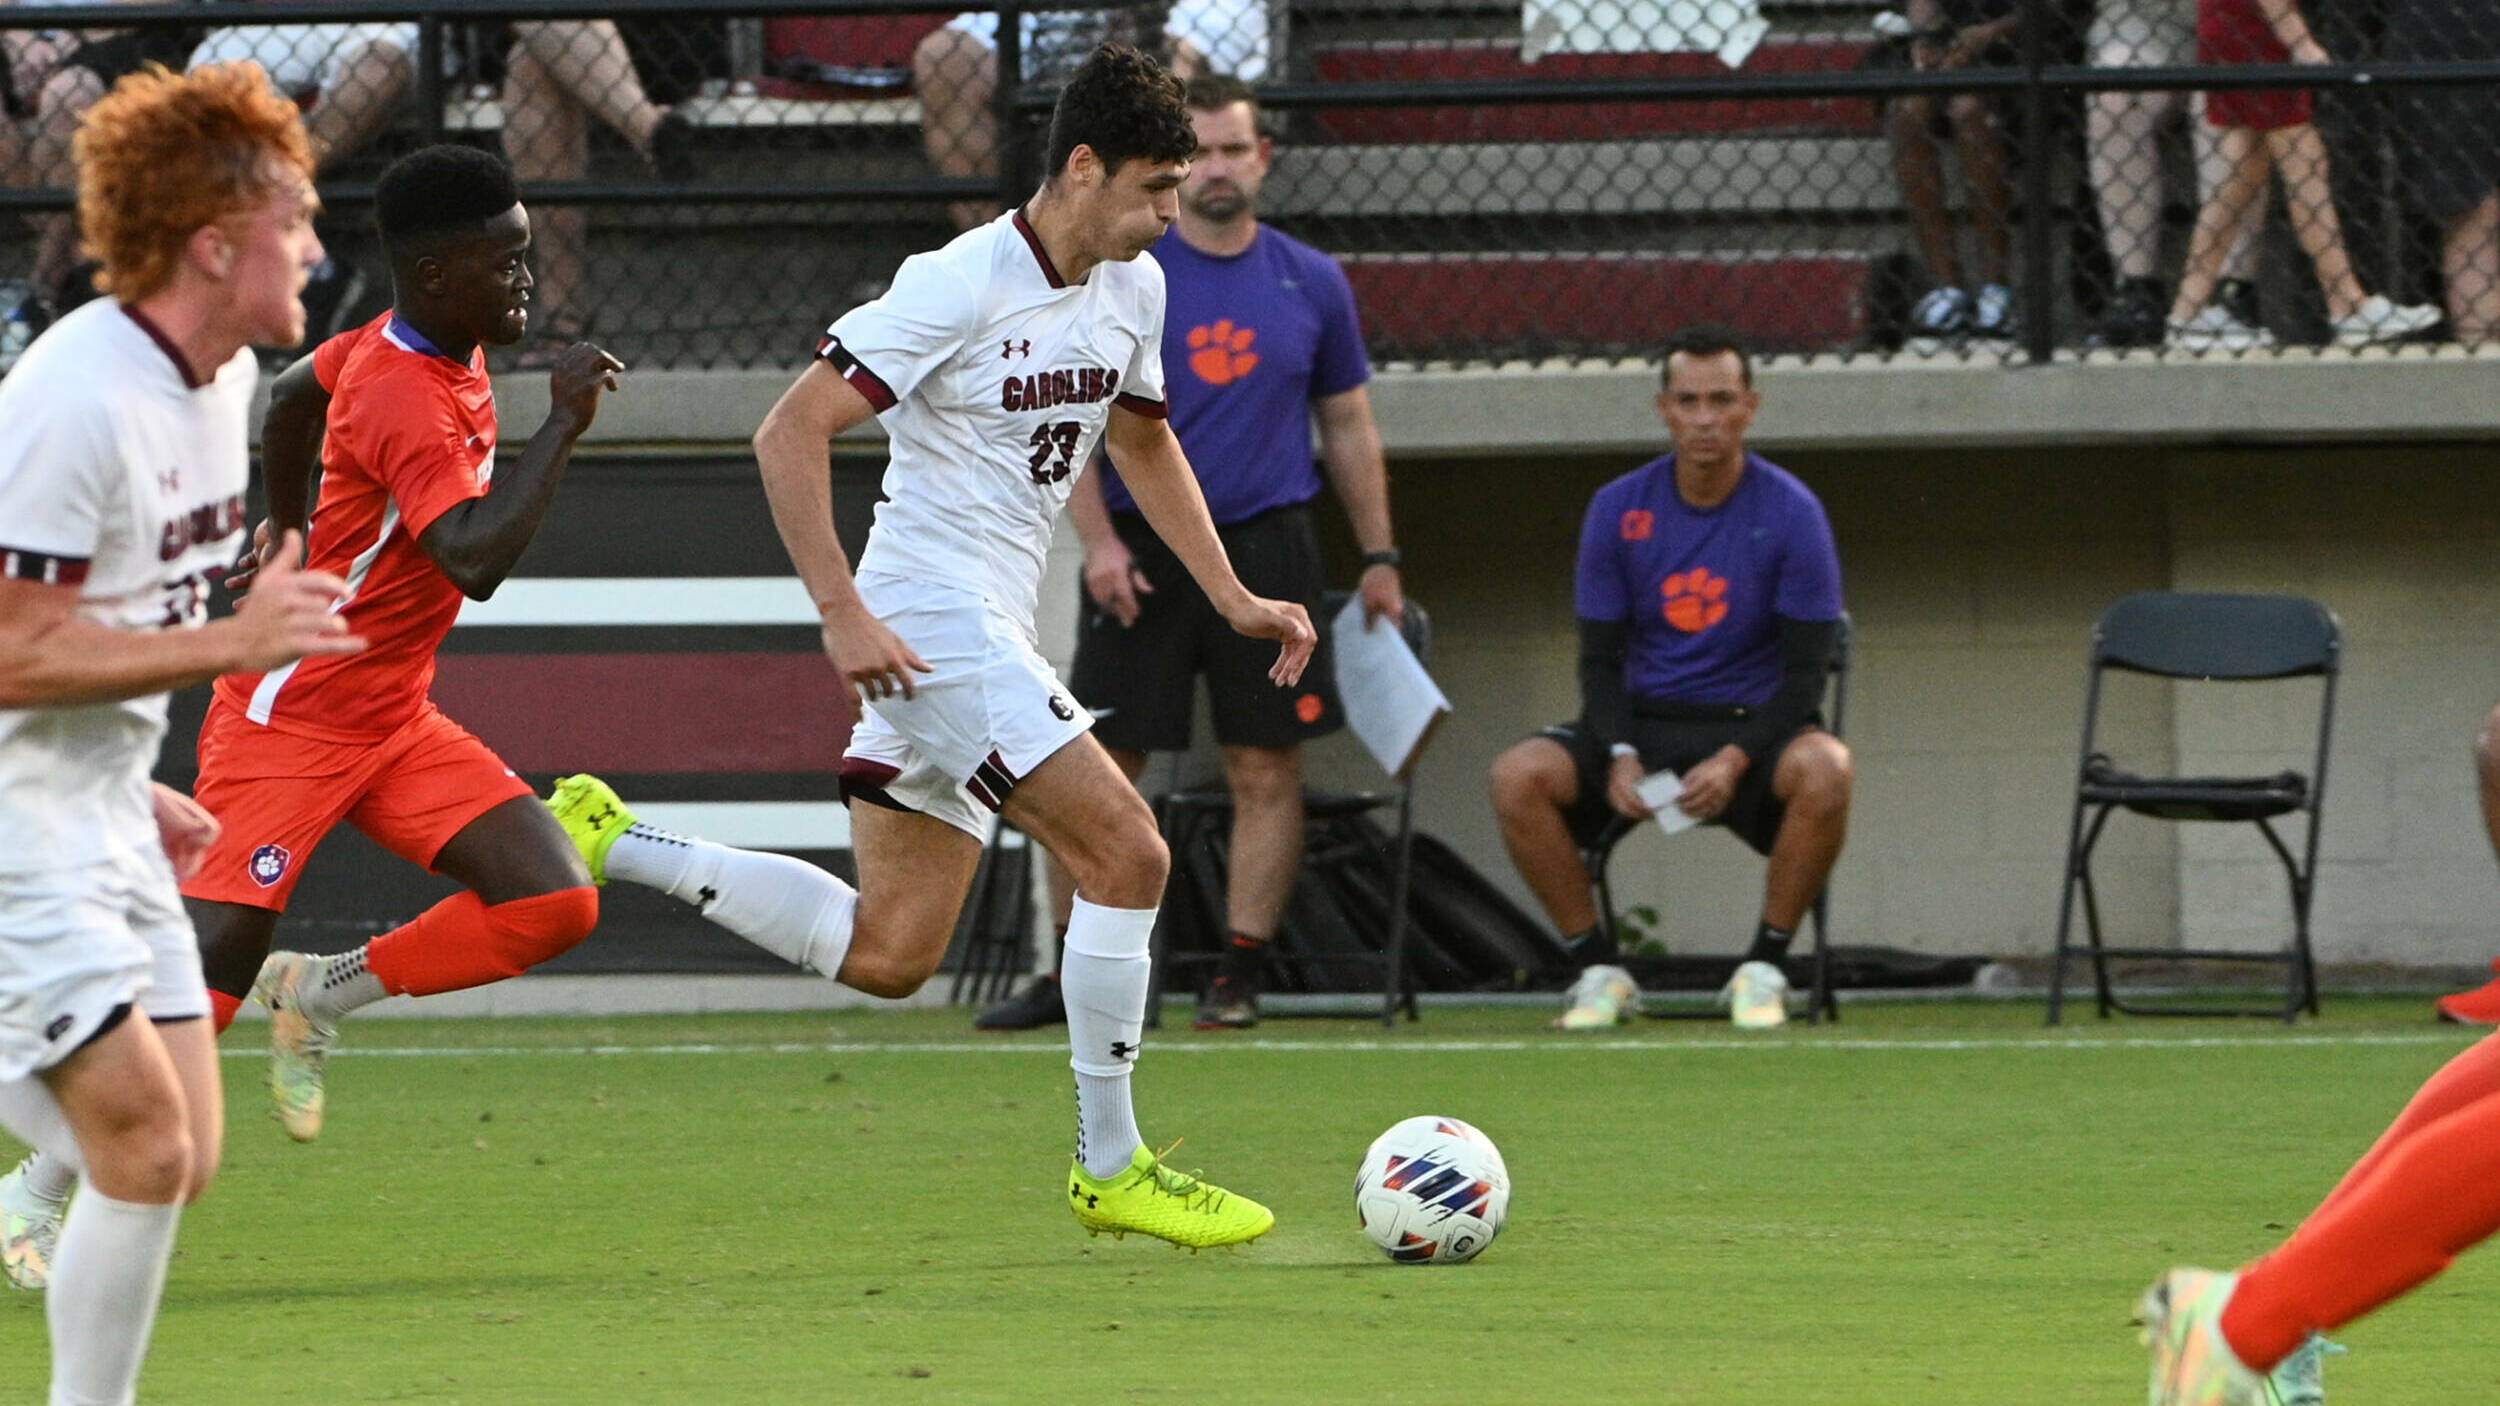 Men's Soccer at West Virginia Saturday Moved to 4 p.m.